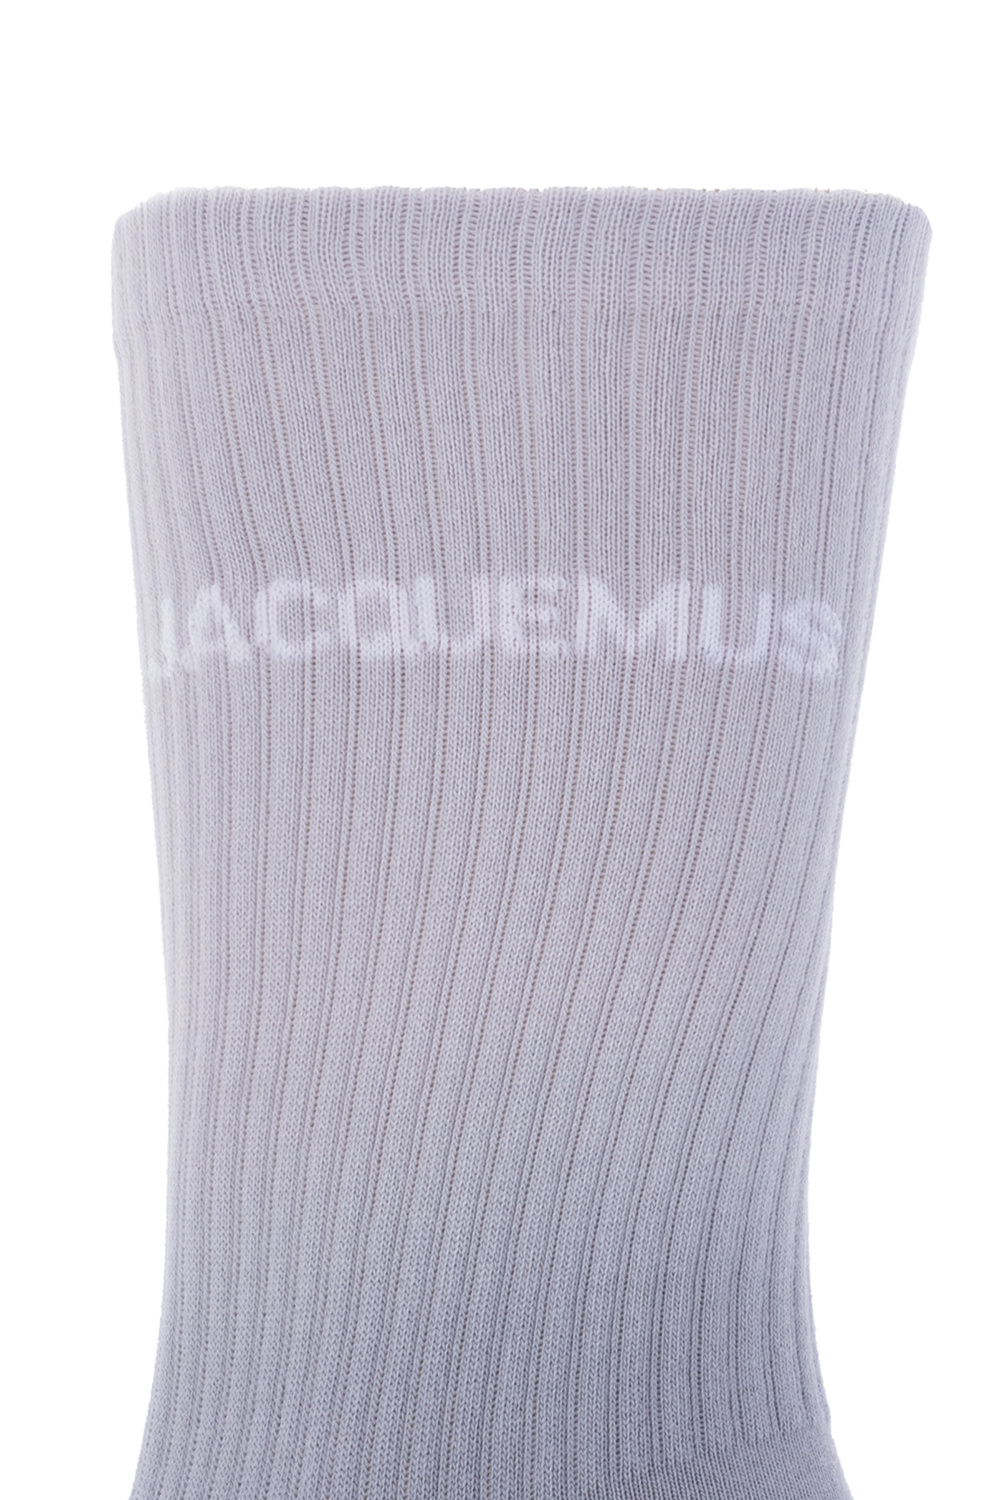 Jacquemus Baby shoes 13-24